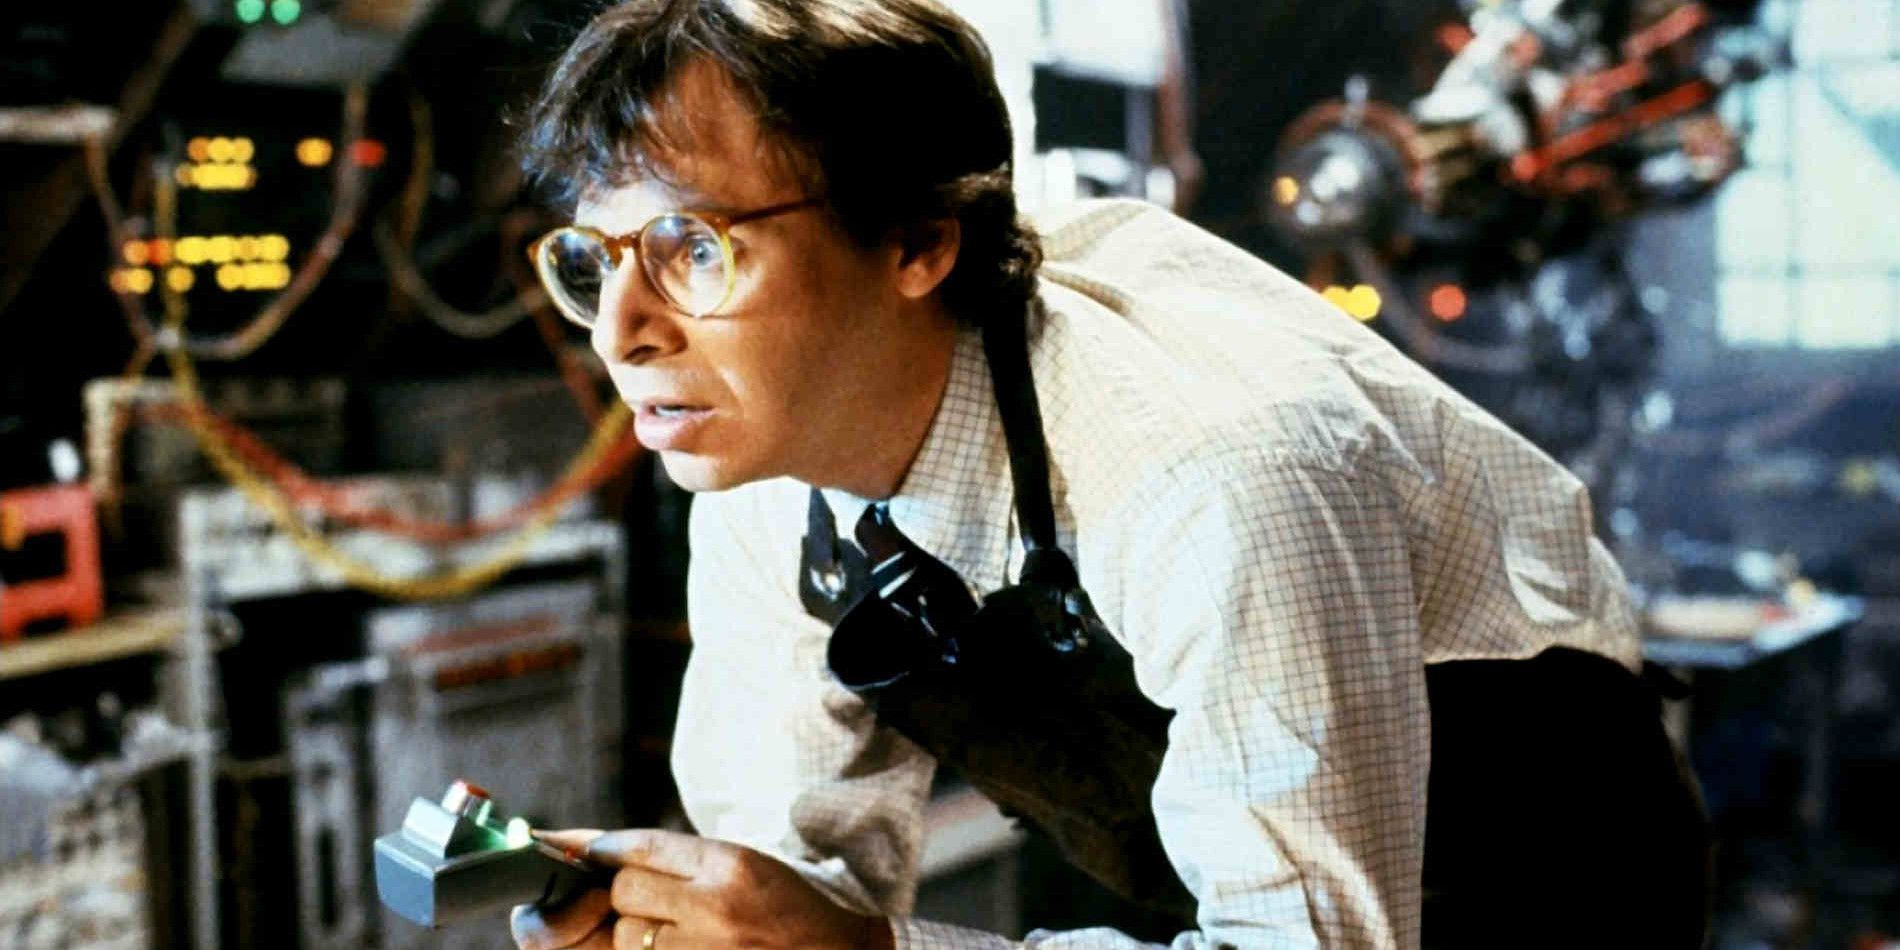 Top 10 Rick Moranis Movies (According To Rotten Tomatoes)